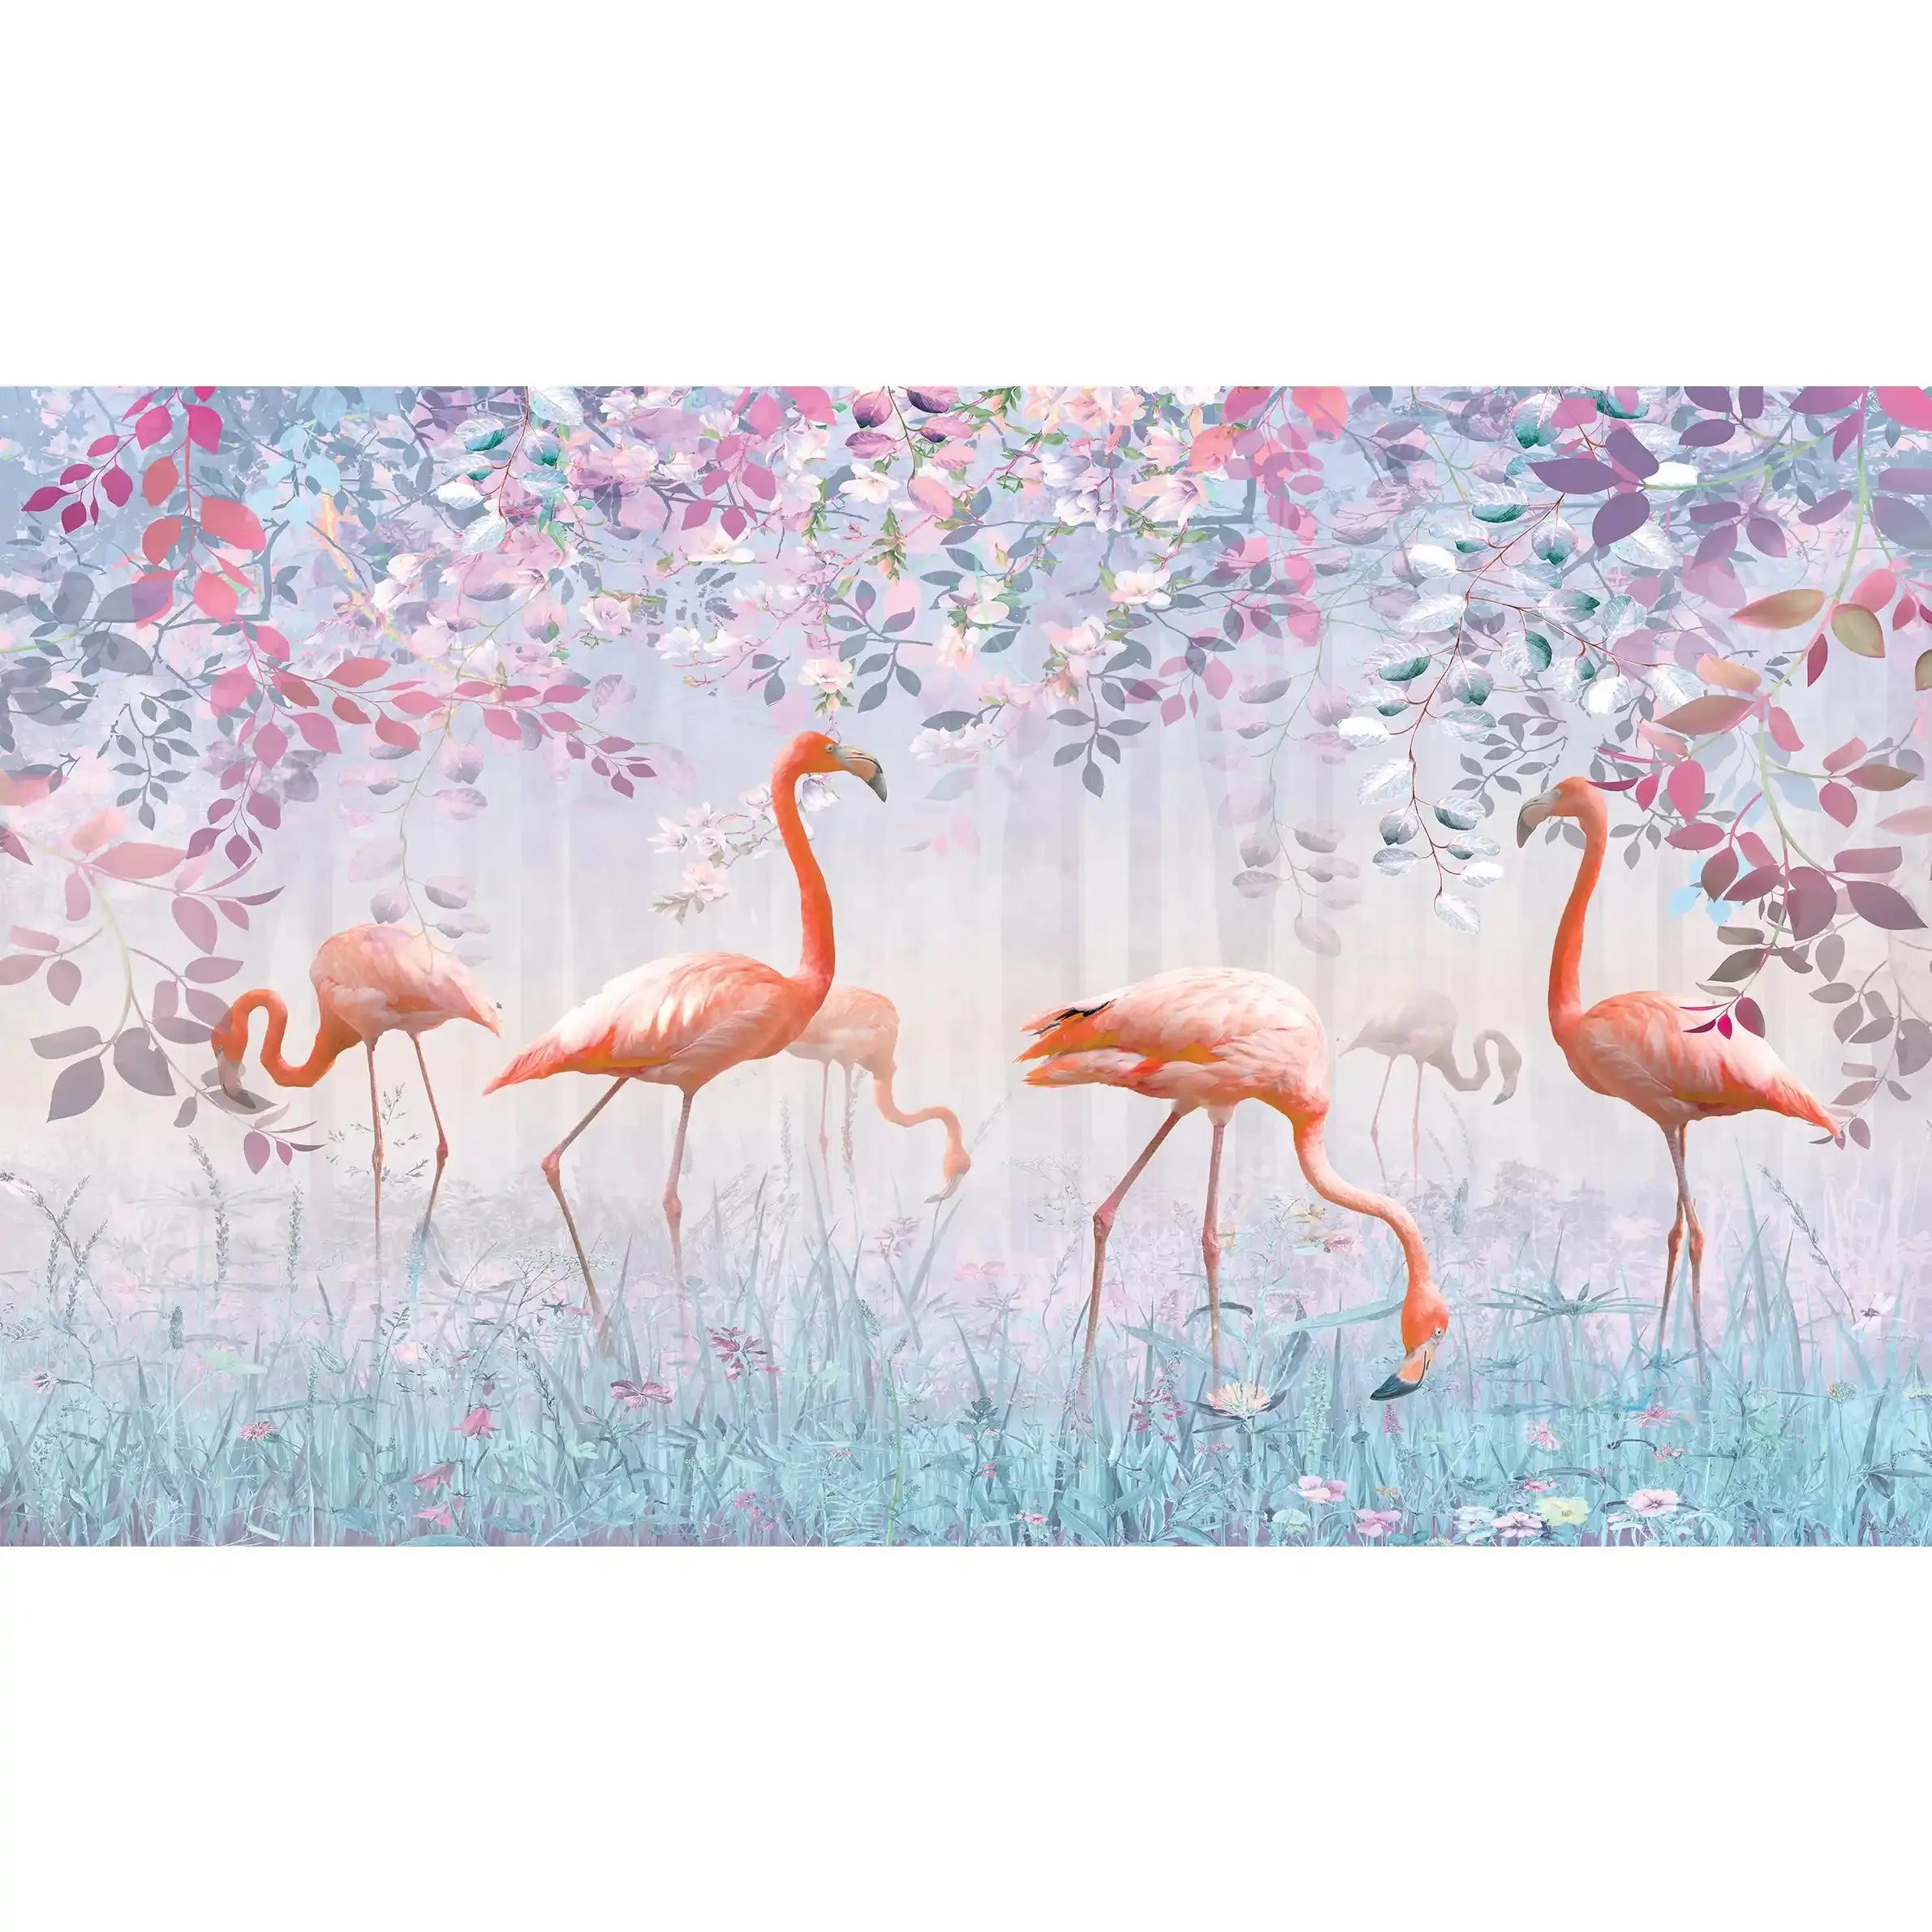 3054-C / Peel and Stick Wallpaper with Pink FlamingoBoho WallPaper for Wall Decor, Easy Install, Removable for Nursery, Bathroom, Bedroom - Artevella